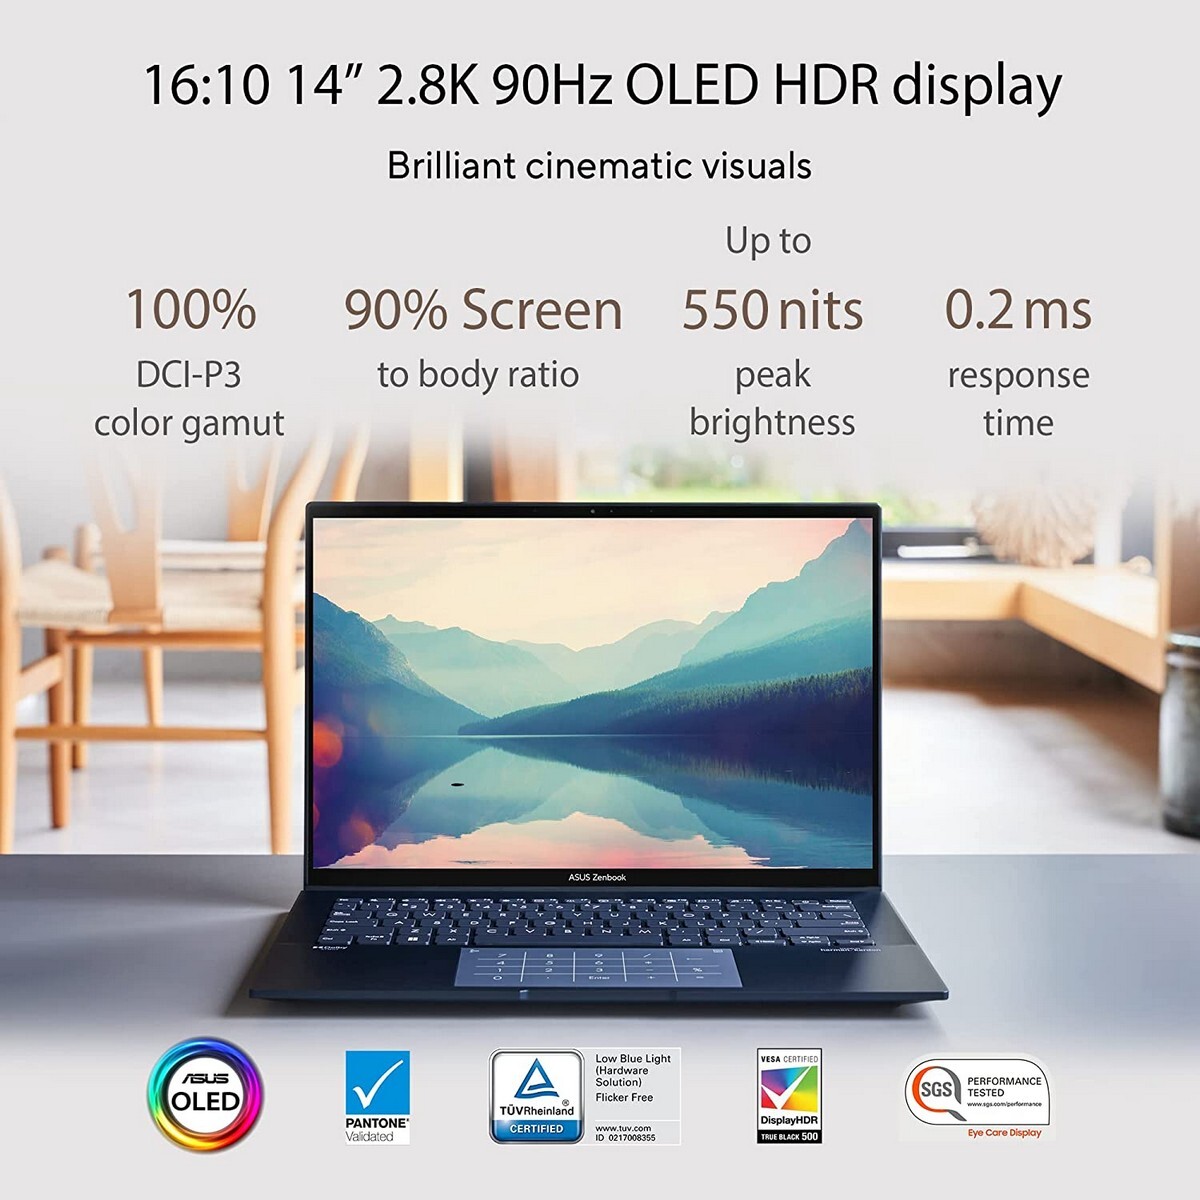 ASUS Zenbook 14 KM731WS Core i7 12th Gen 16GB/512GB SSD/Win 11 Thin and Light Laptop